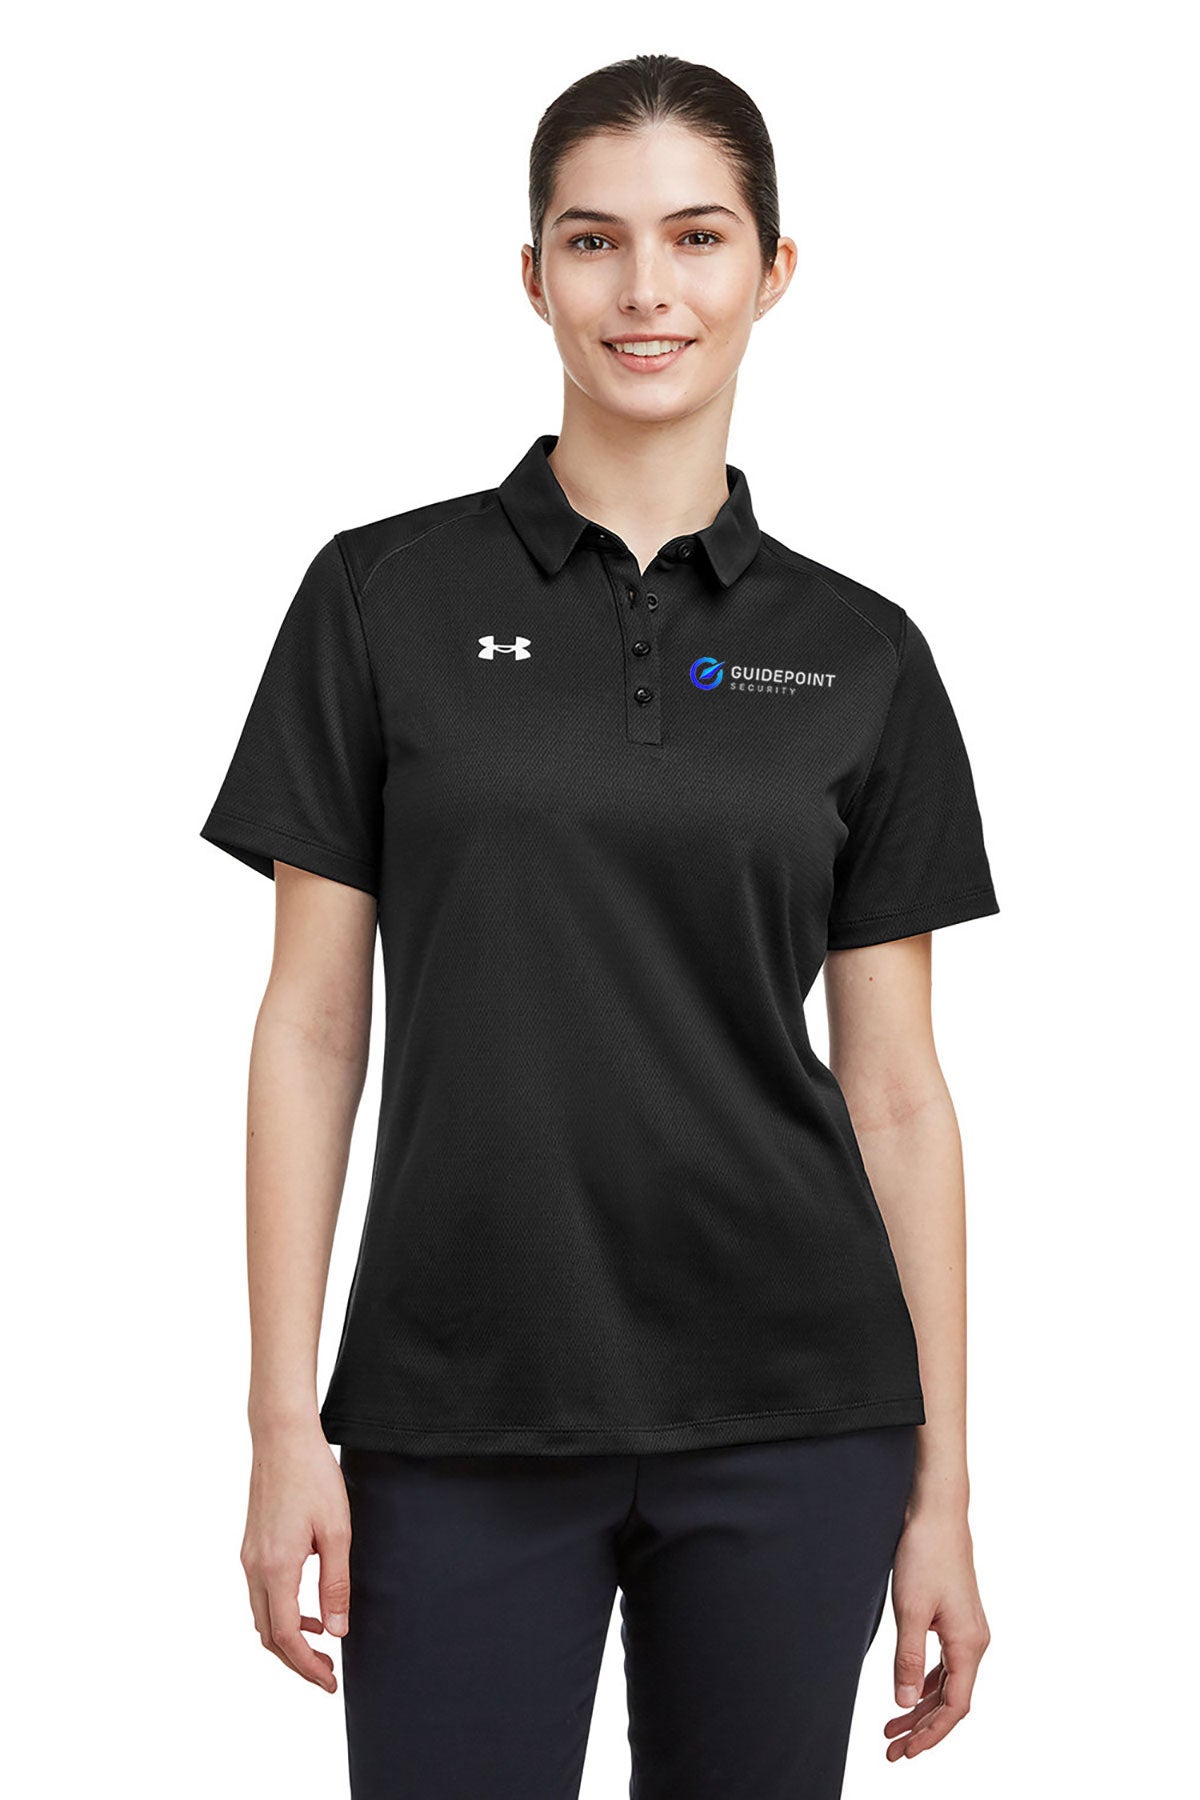 Under Armour Ladies Tech Polo, Black [GuidePoint Security]